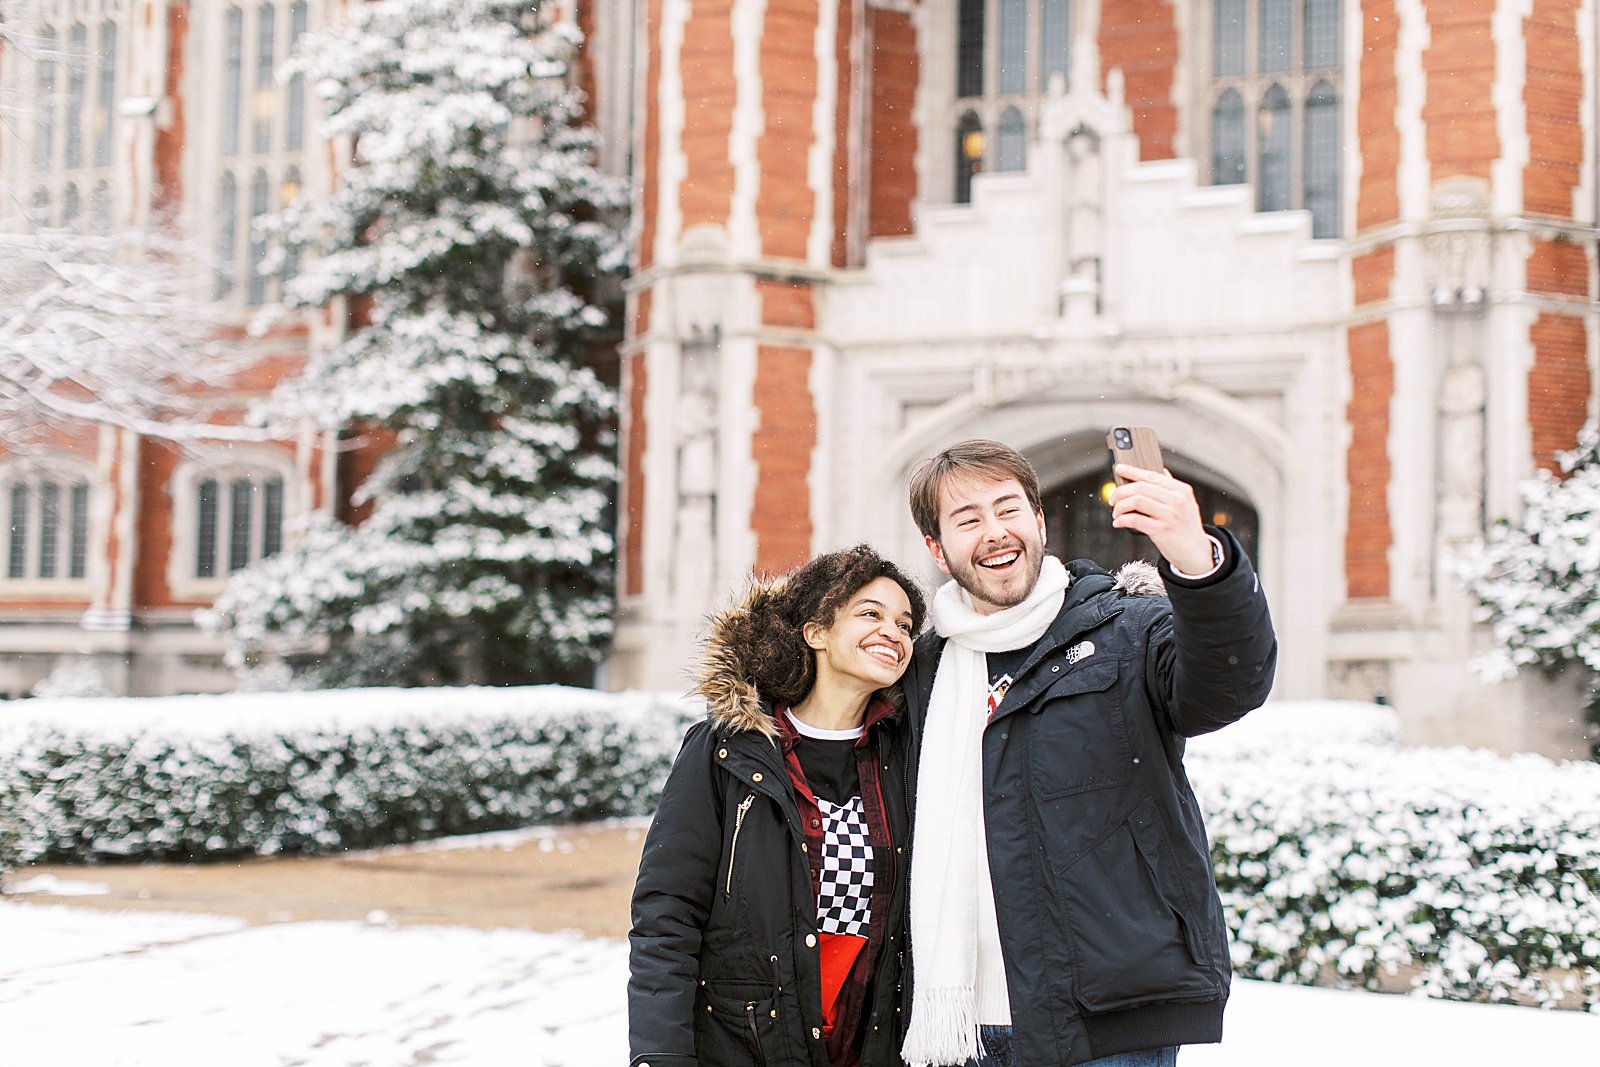 ou students taking selfie in snow